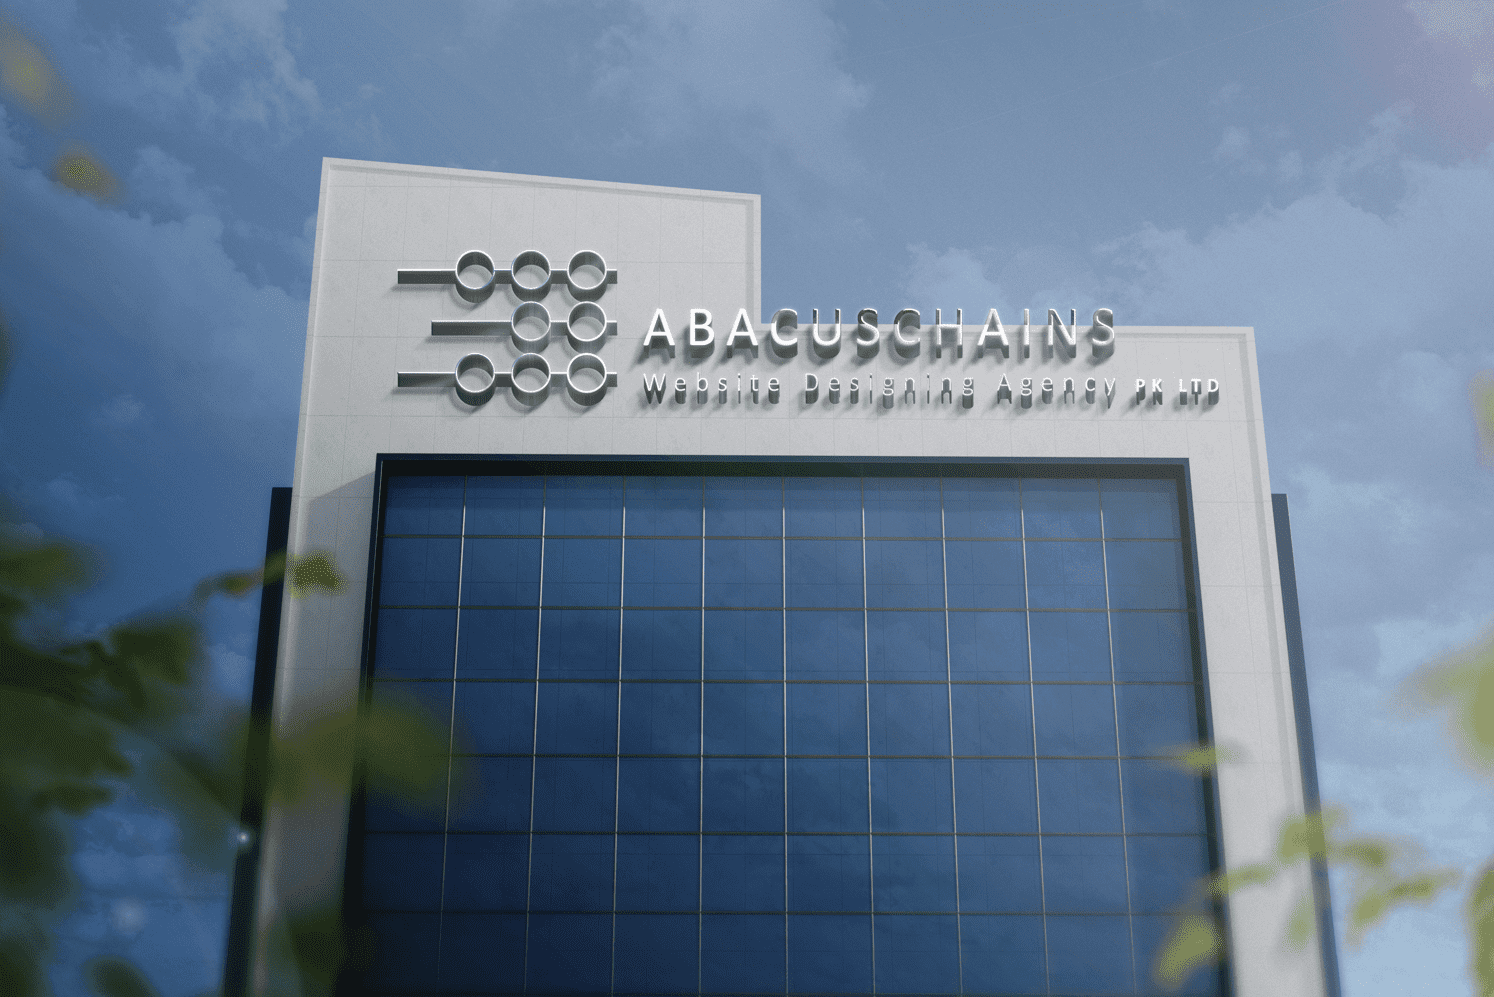 Abacucschains Website Designing Agency Head Office Building Image